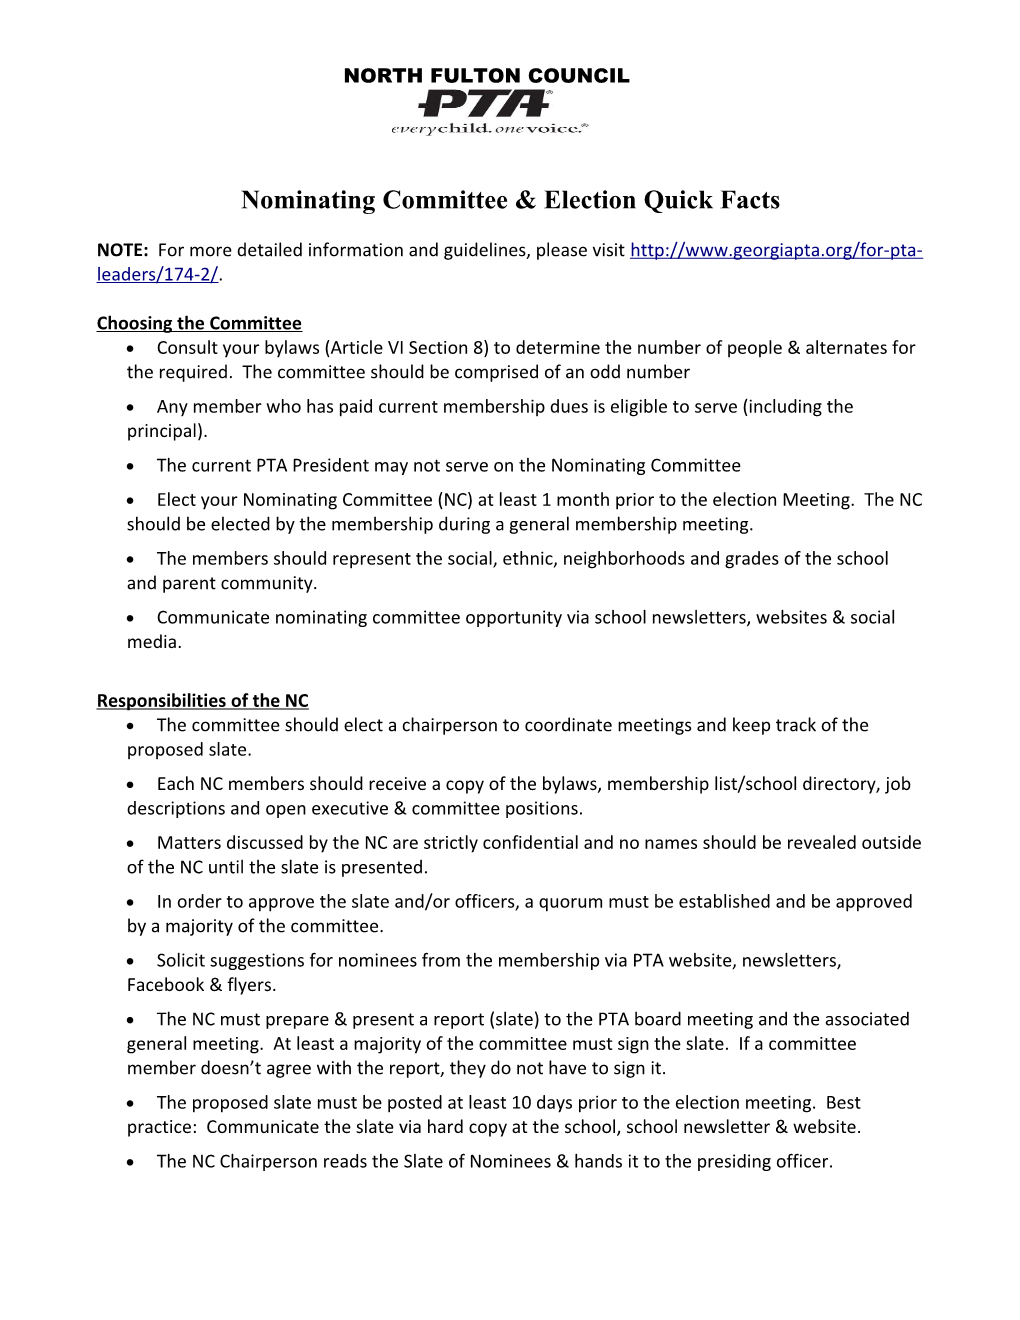 Nominating Committee & Election Quick Facts